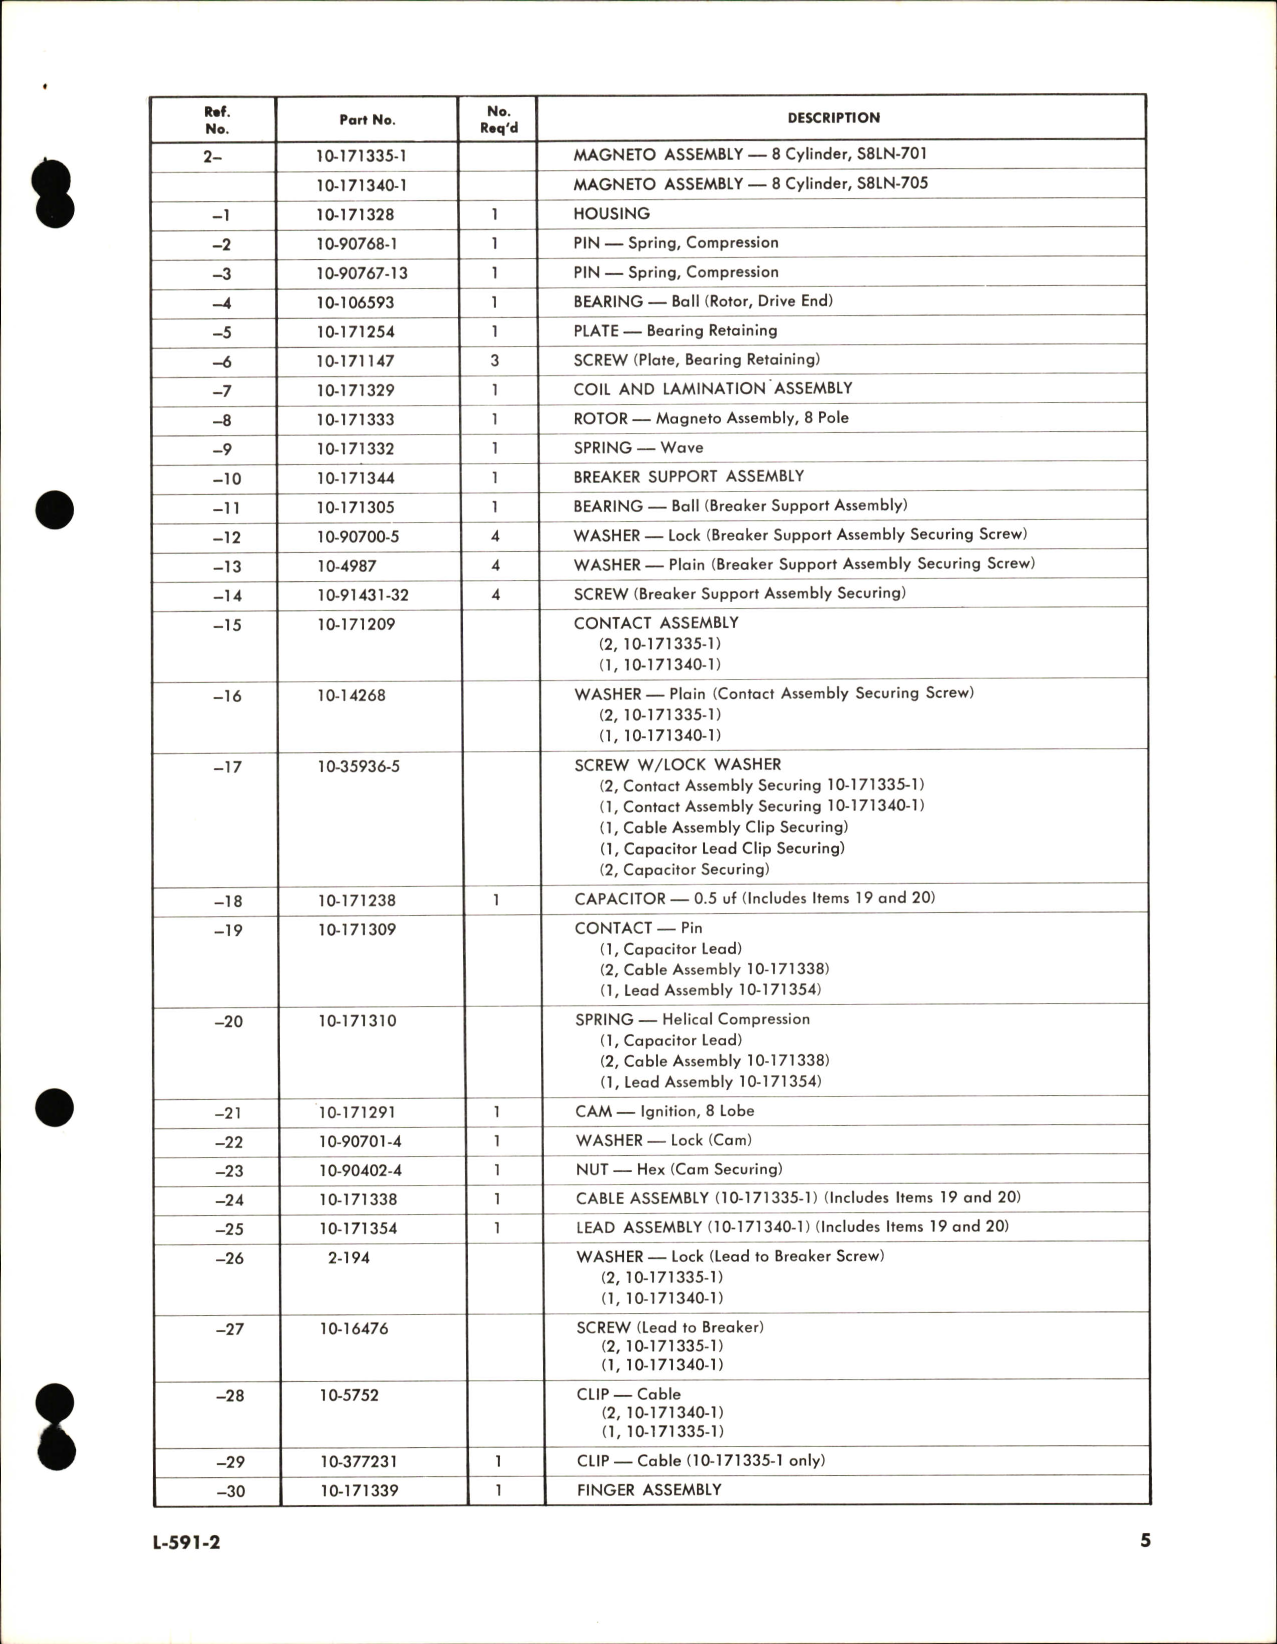 Sample page 5 from AirCorps Library document: Service Parts List for S-700 Magneto and Harness Assembly